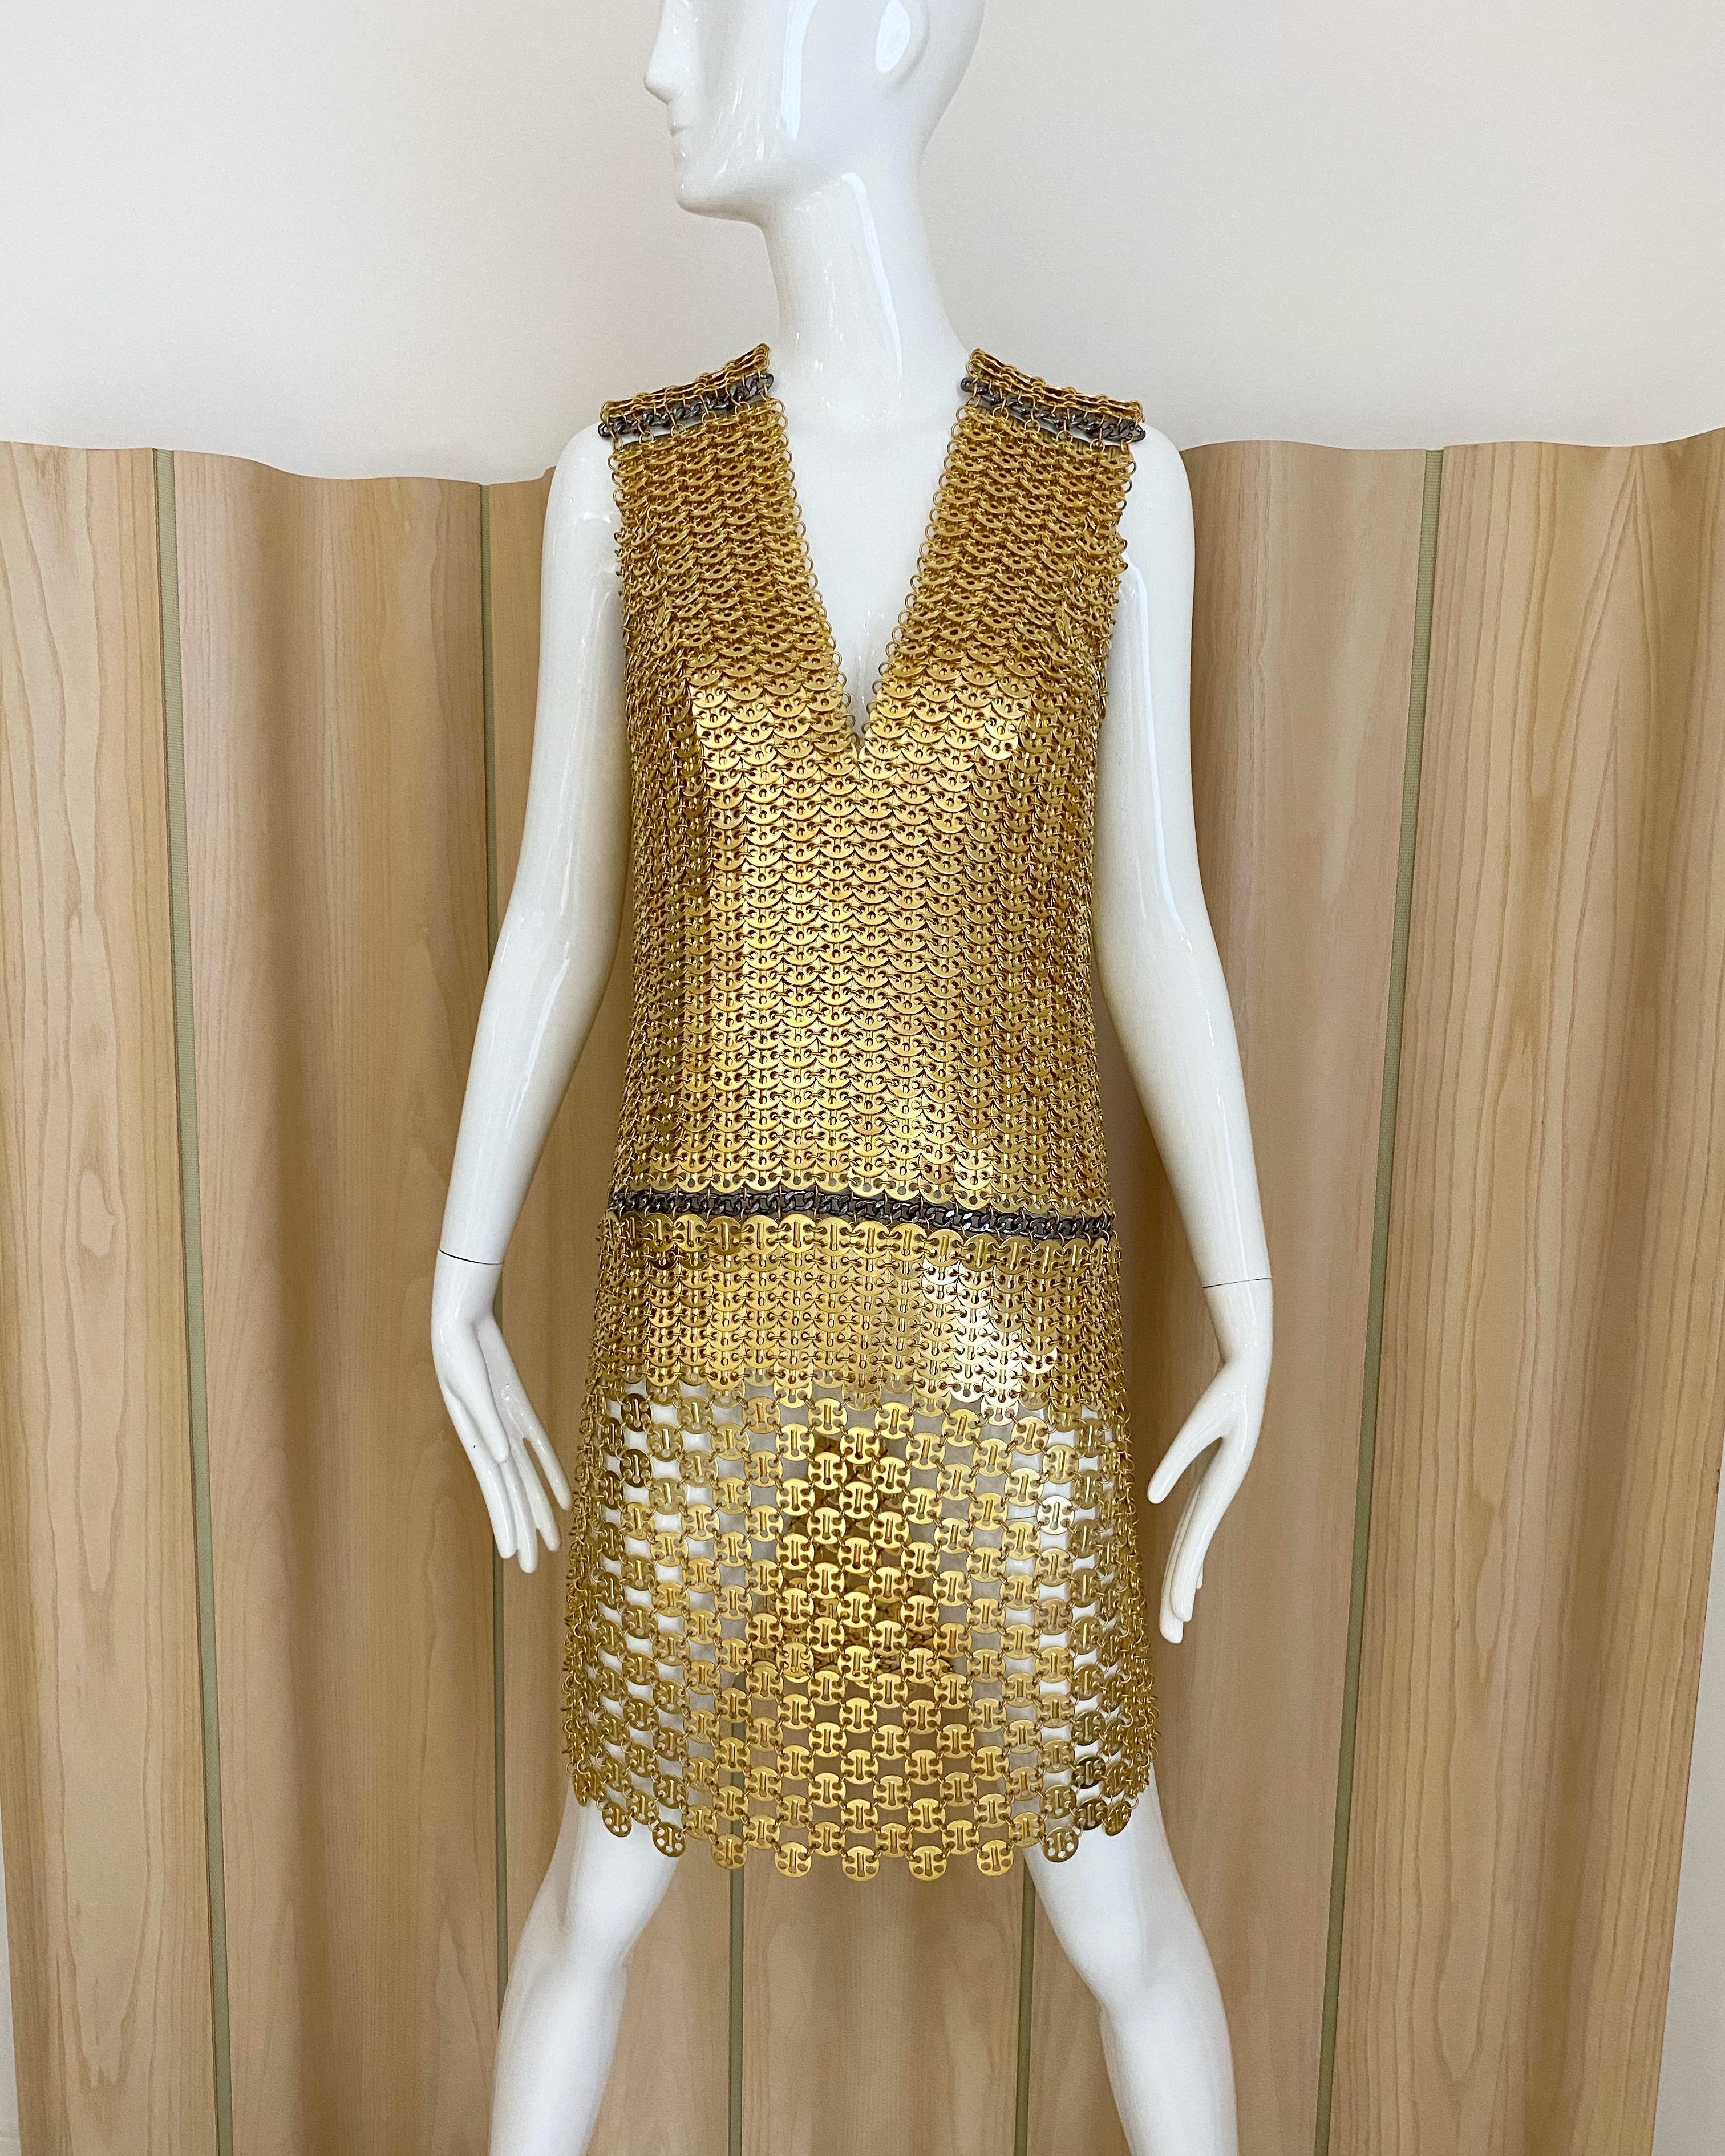 Never worn Paco Rabanne Gold chain link sleeveless cocktail dress.
New with tag.
In excellent condition.
Fit size 4-6